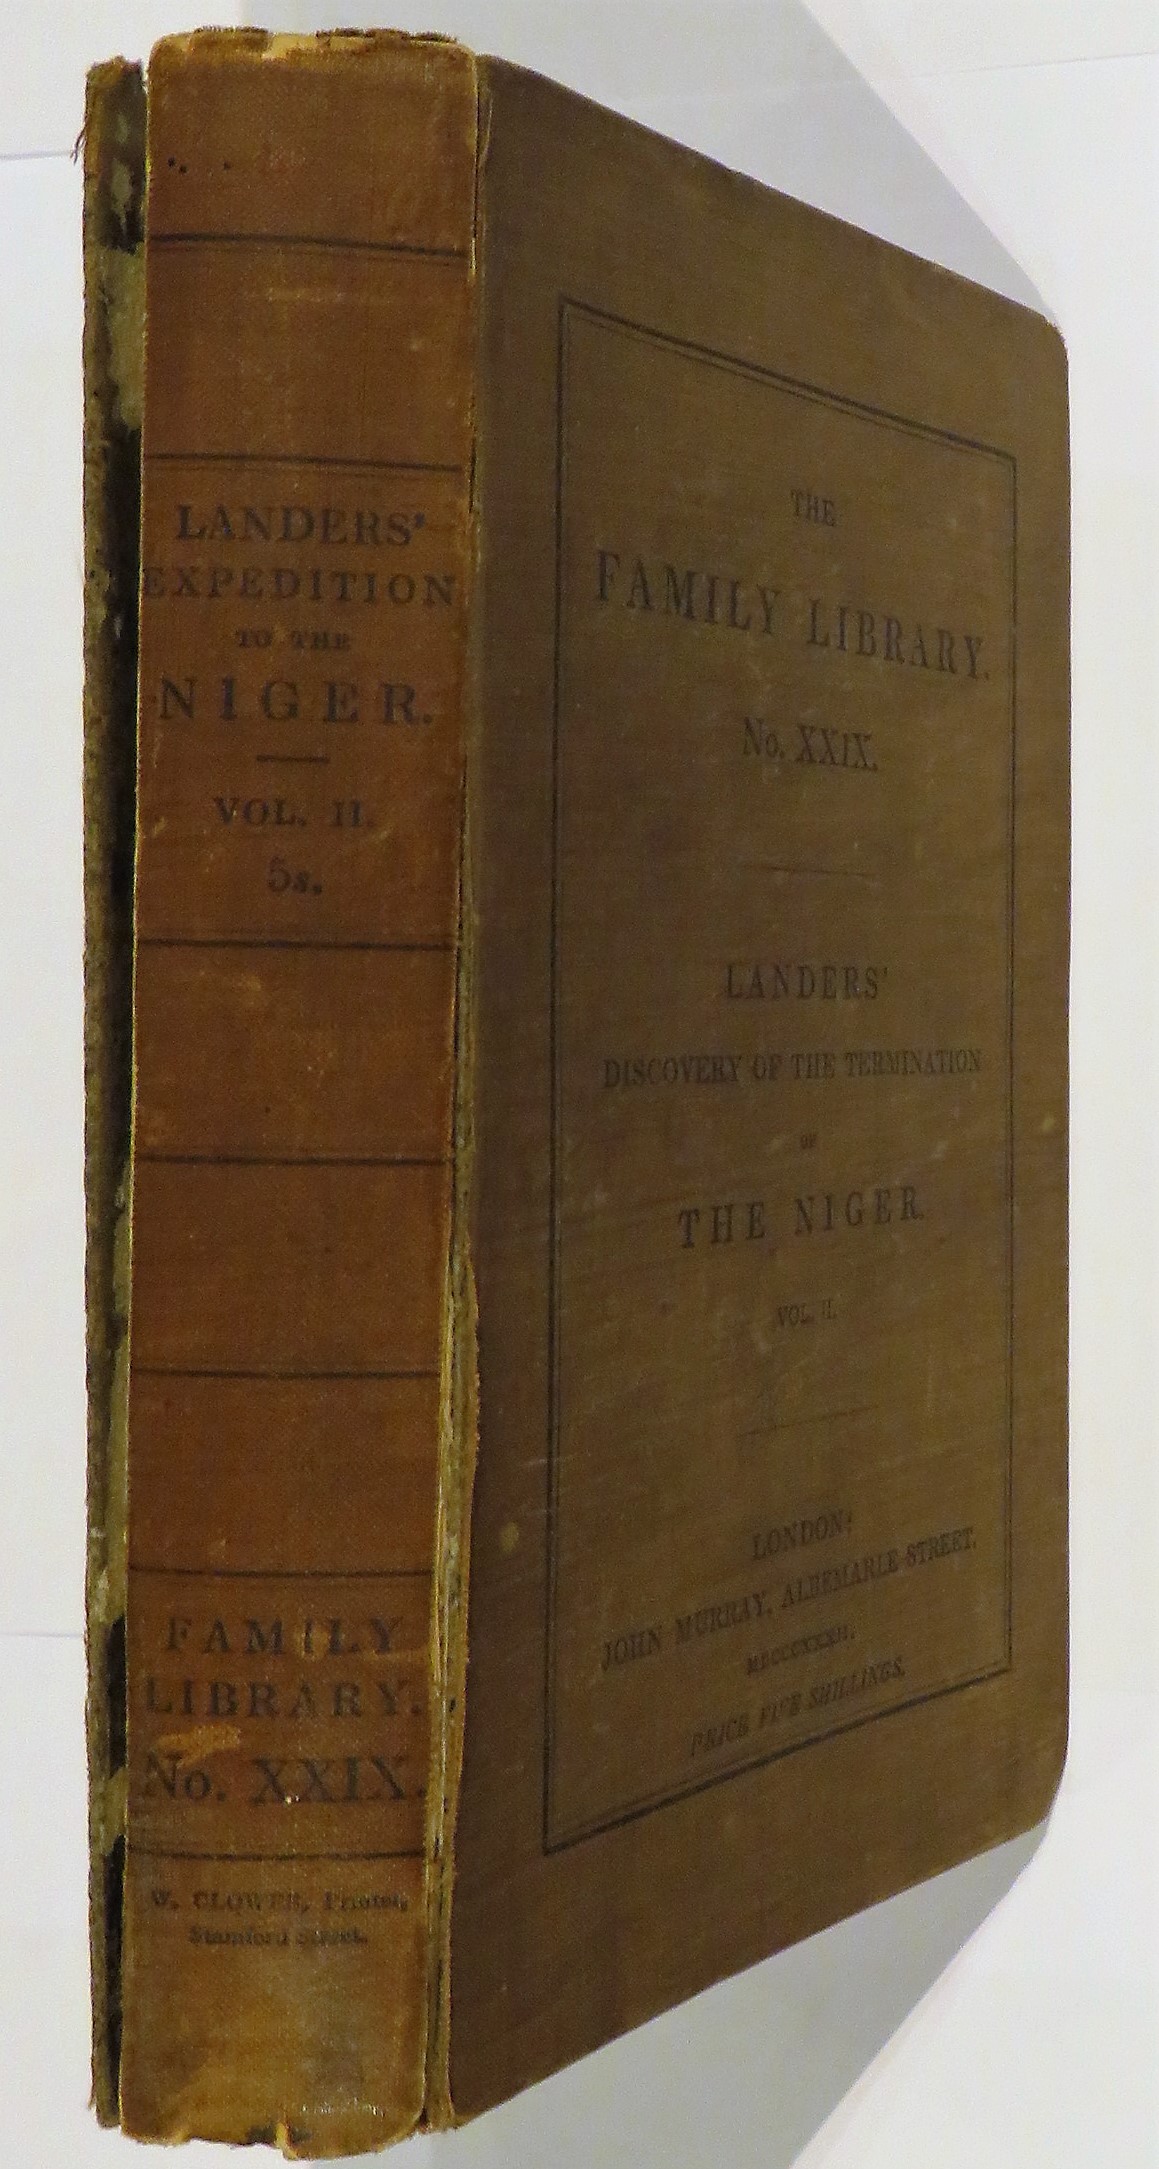 Journal of An Expedition to Explore the Course and Termination of The Niger; With a Narrative of a Voyage Down that River To Its Termination Vol II Only